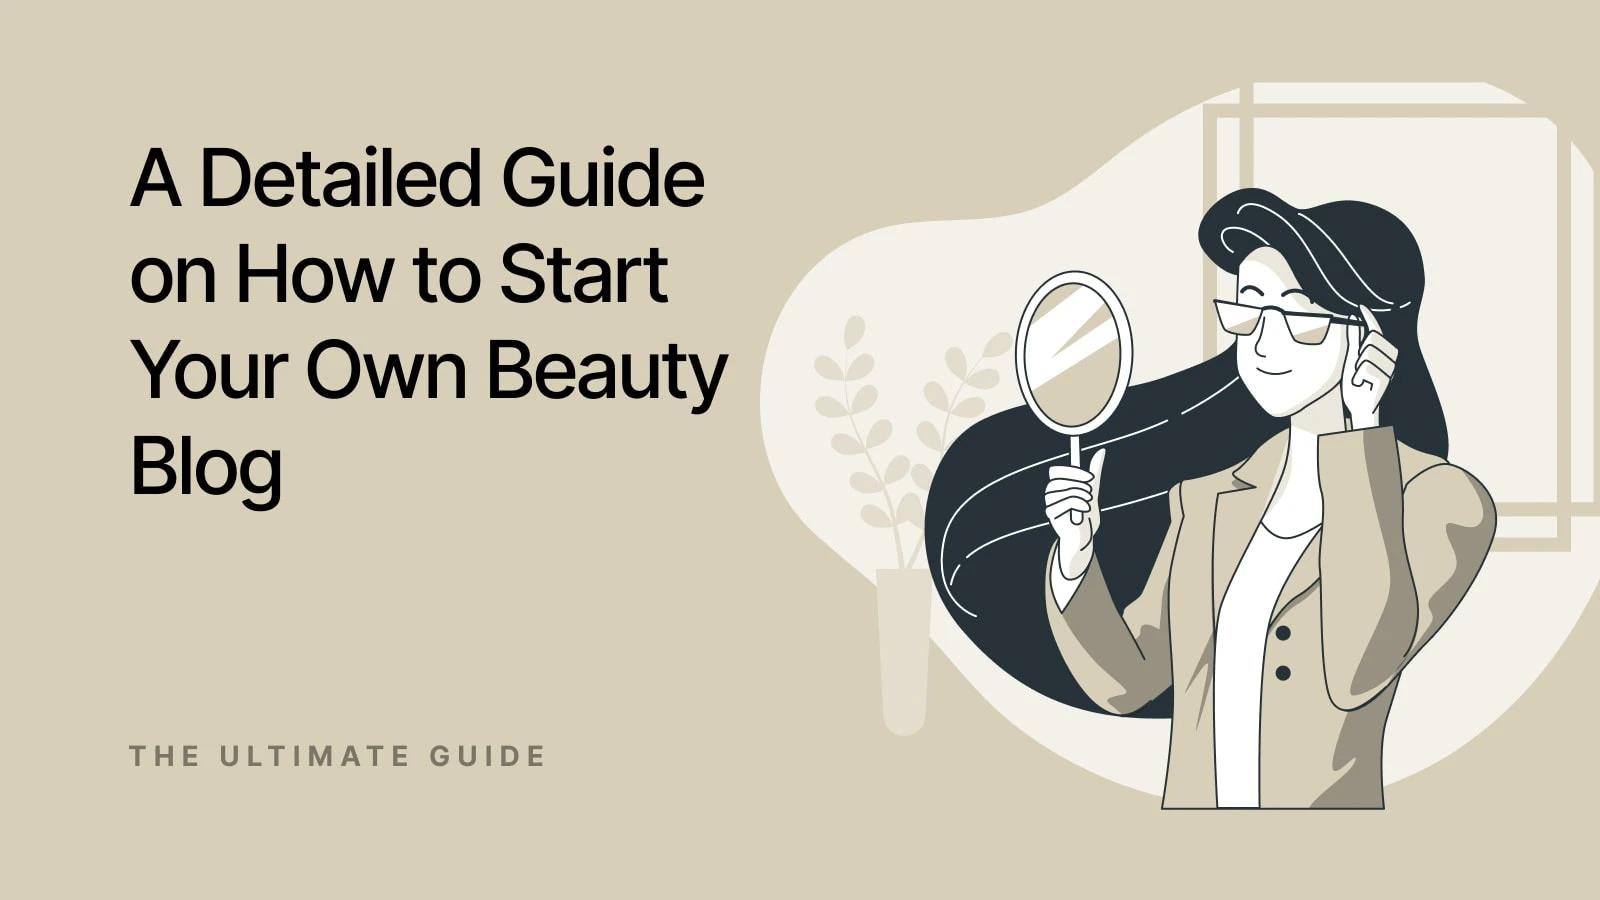 Beauty Blogging Guide: Step-by-Step for Beginners